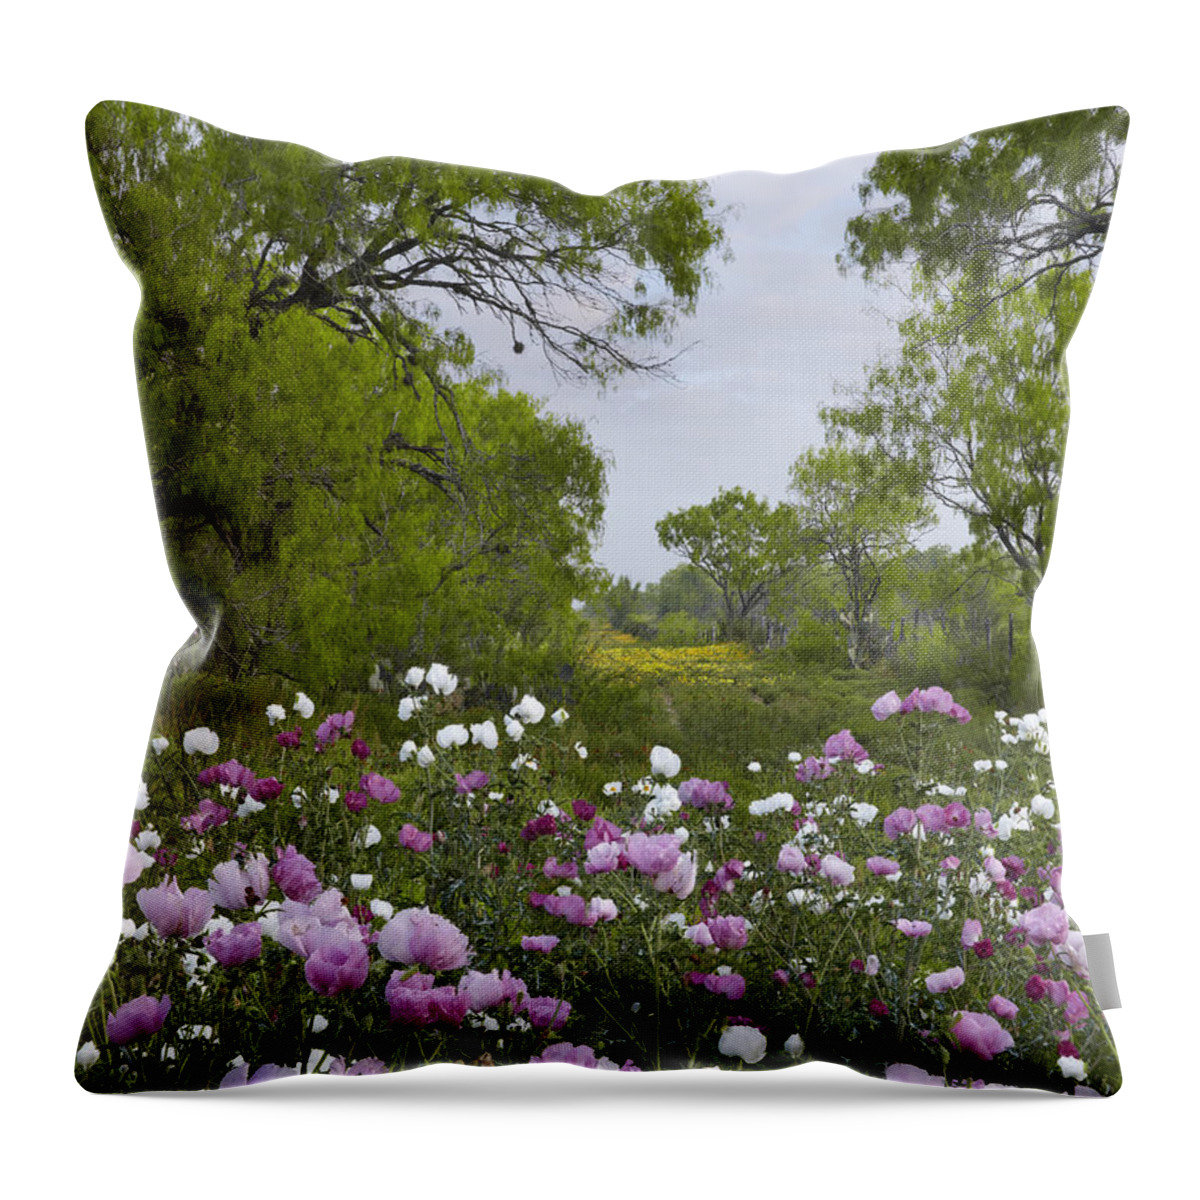 00442656 Throw Pillow featuring the photograph Long Pricklyhead Poppy Field by Tim Fitzharris